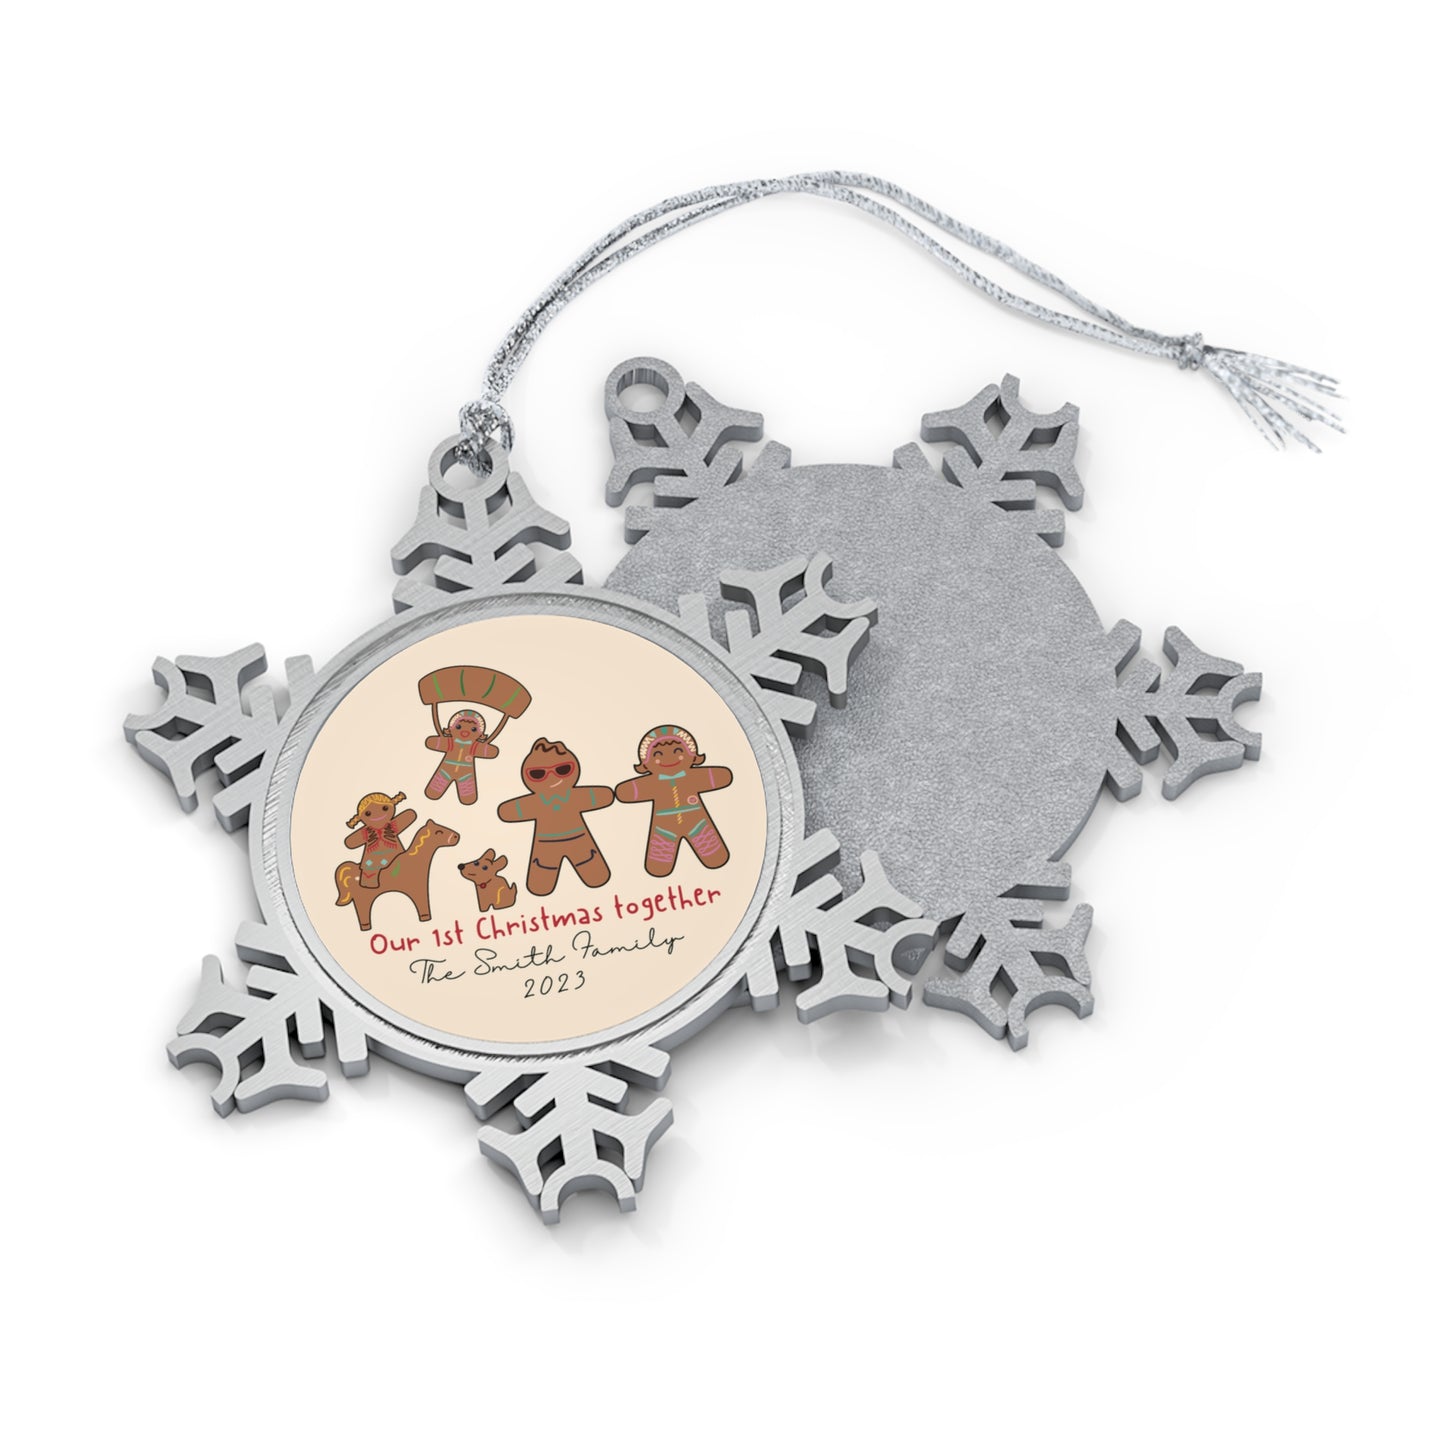 Personalised Pewter Snowflake Ornament | Gingerbread Family of 4 with Dog